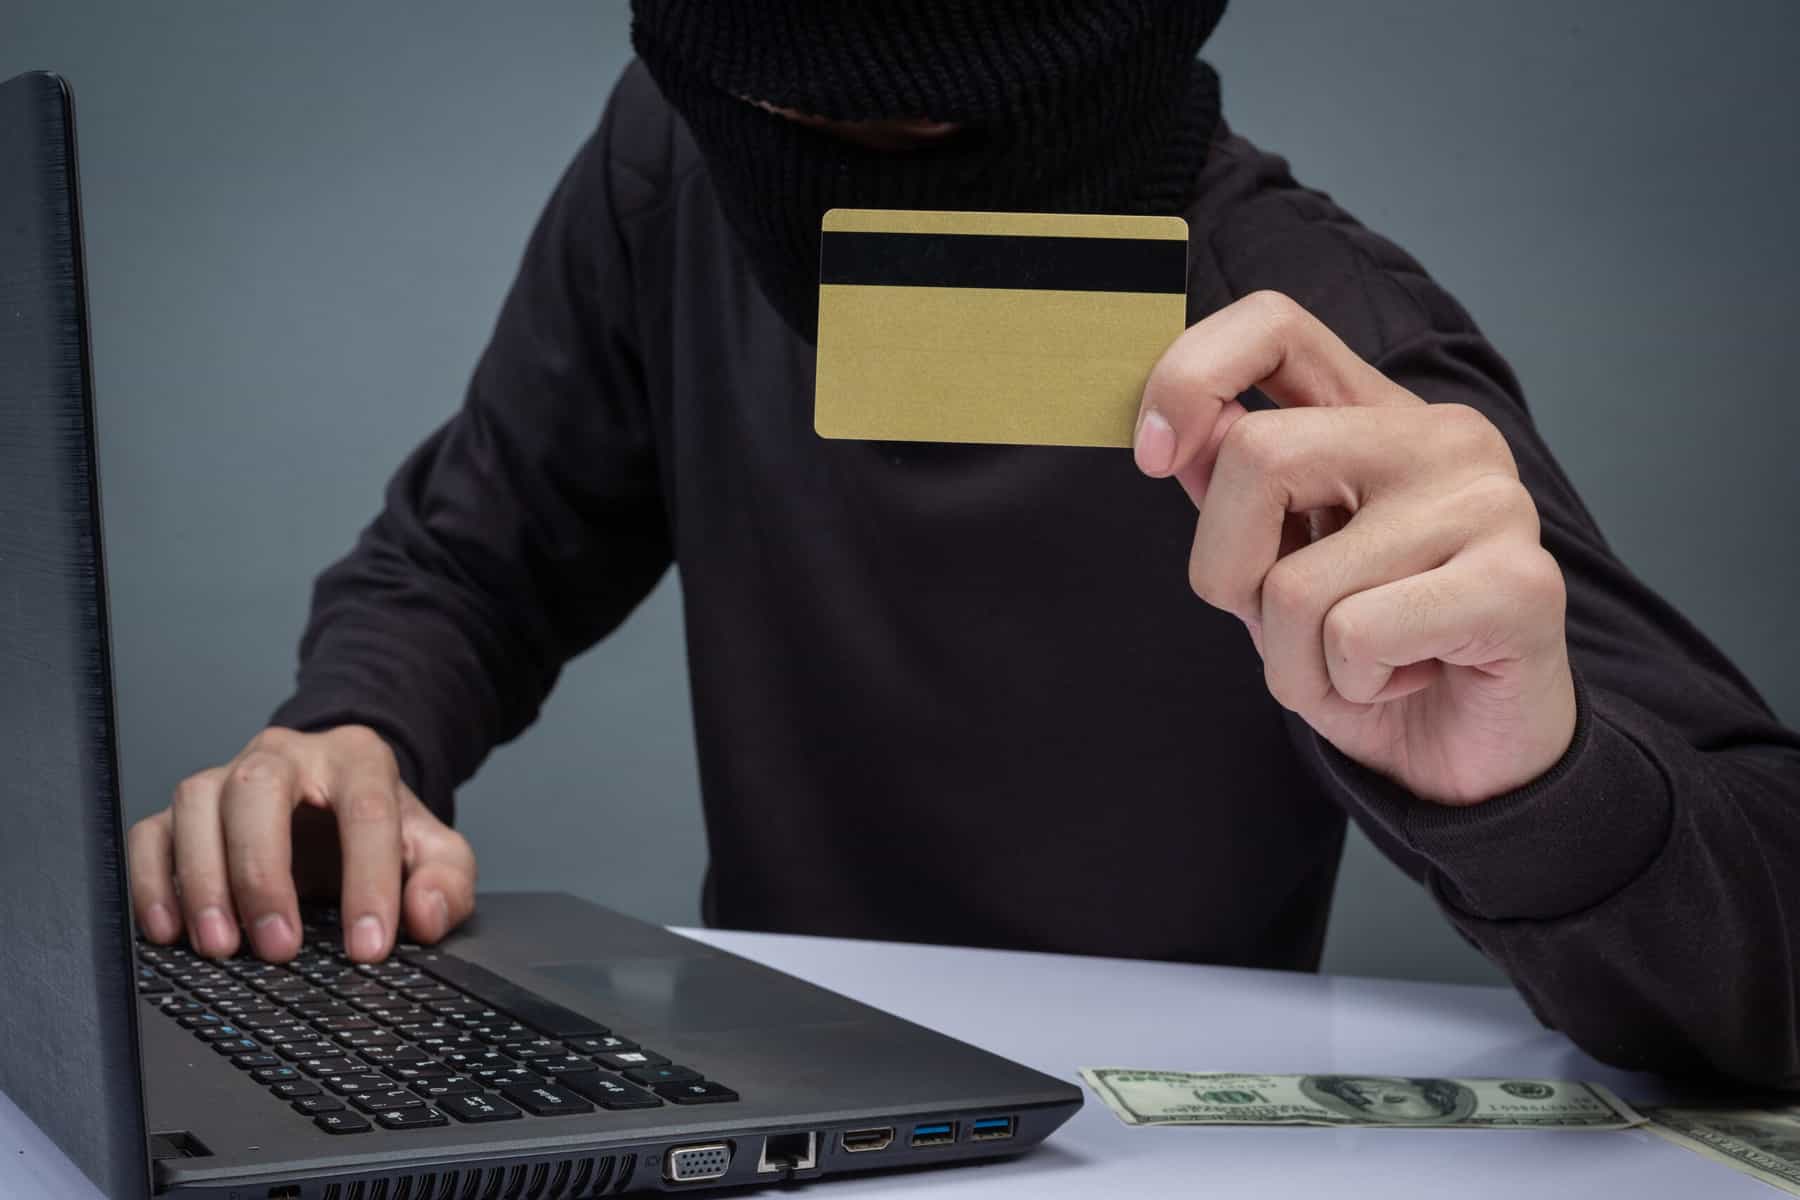 A person disguised in black clothing and a mask is seen as a computer with paper money at their elbow and holding a credit card.